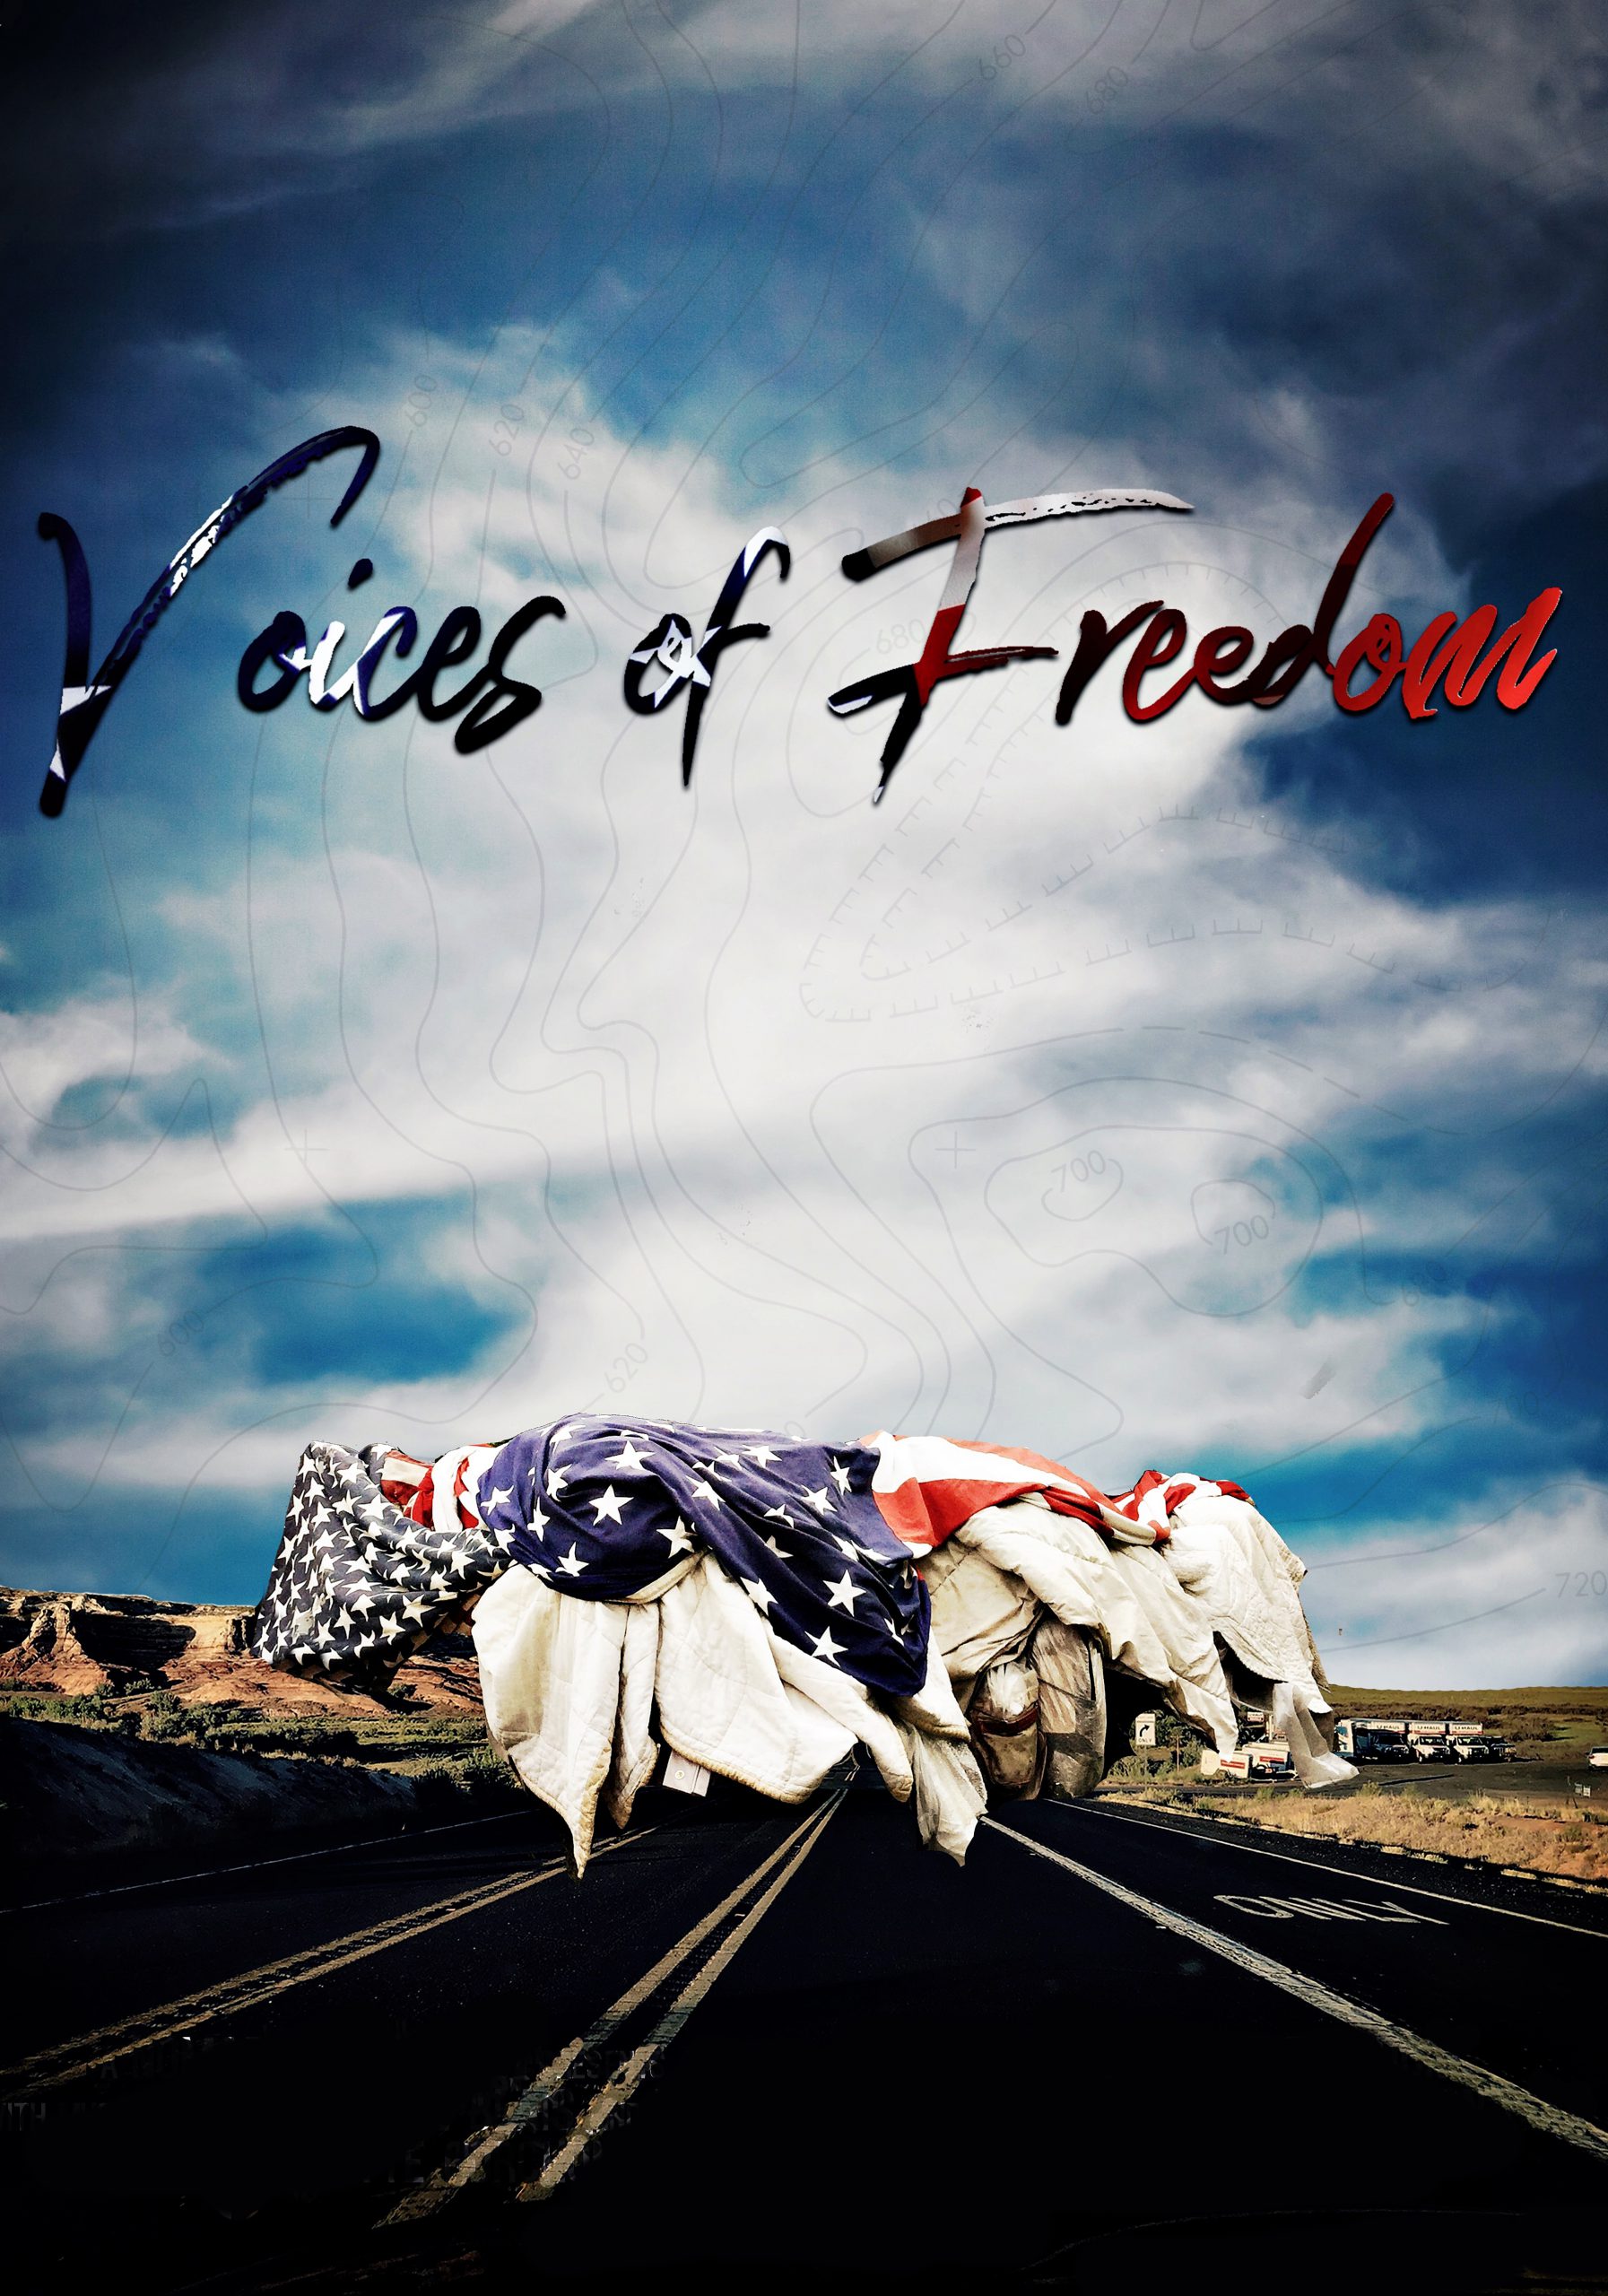 VOICES OF FREEDOM